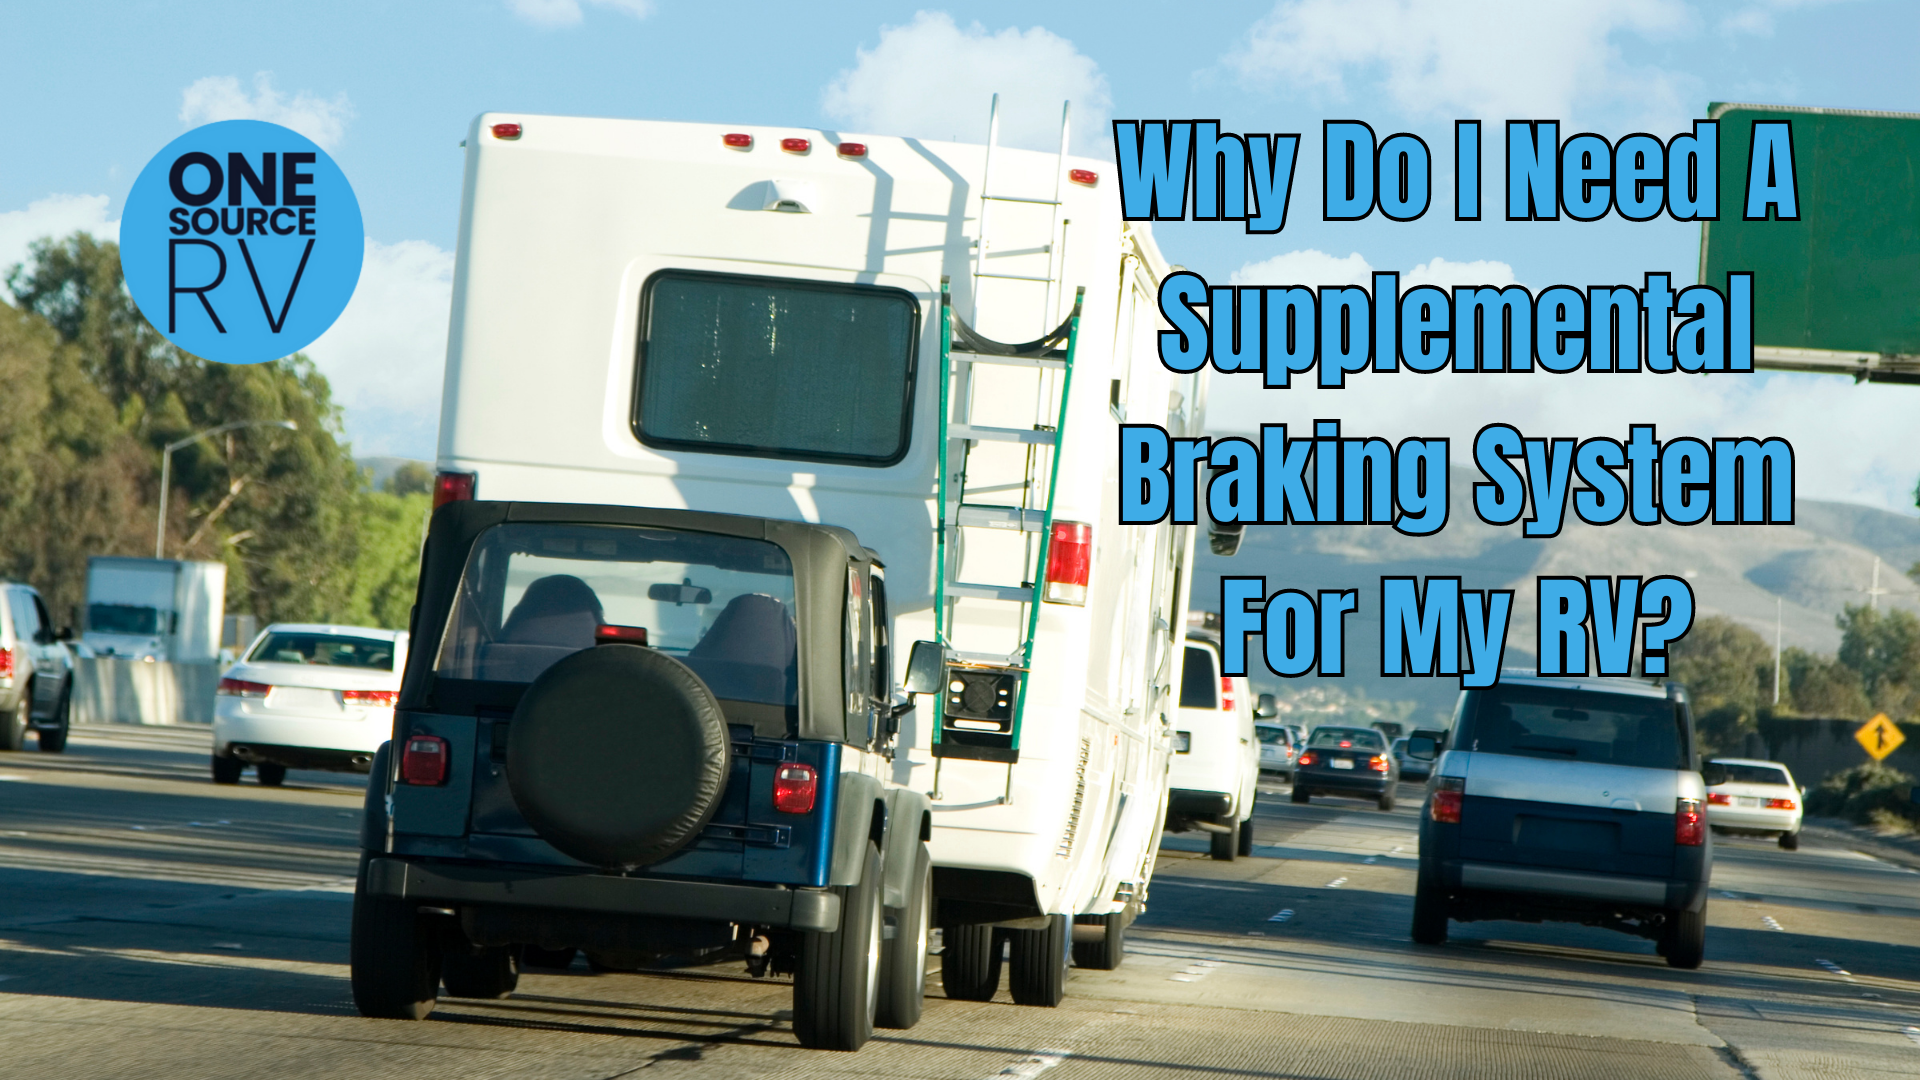 Why Do I Need A Supplemental Braking System For My RV?